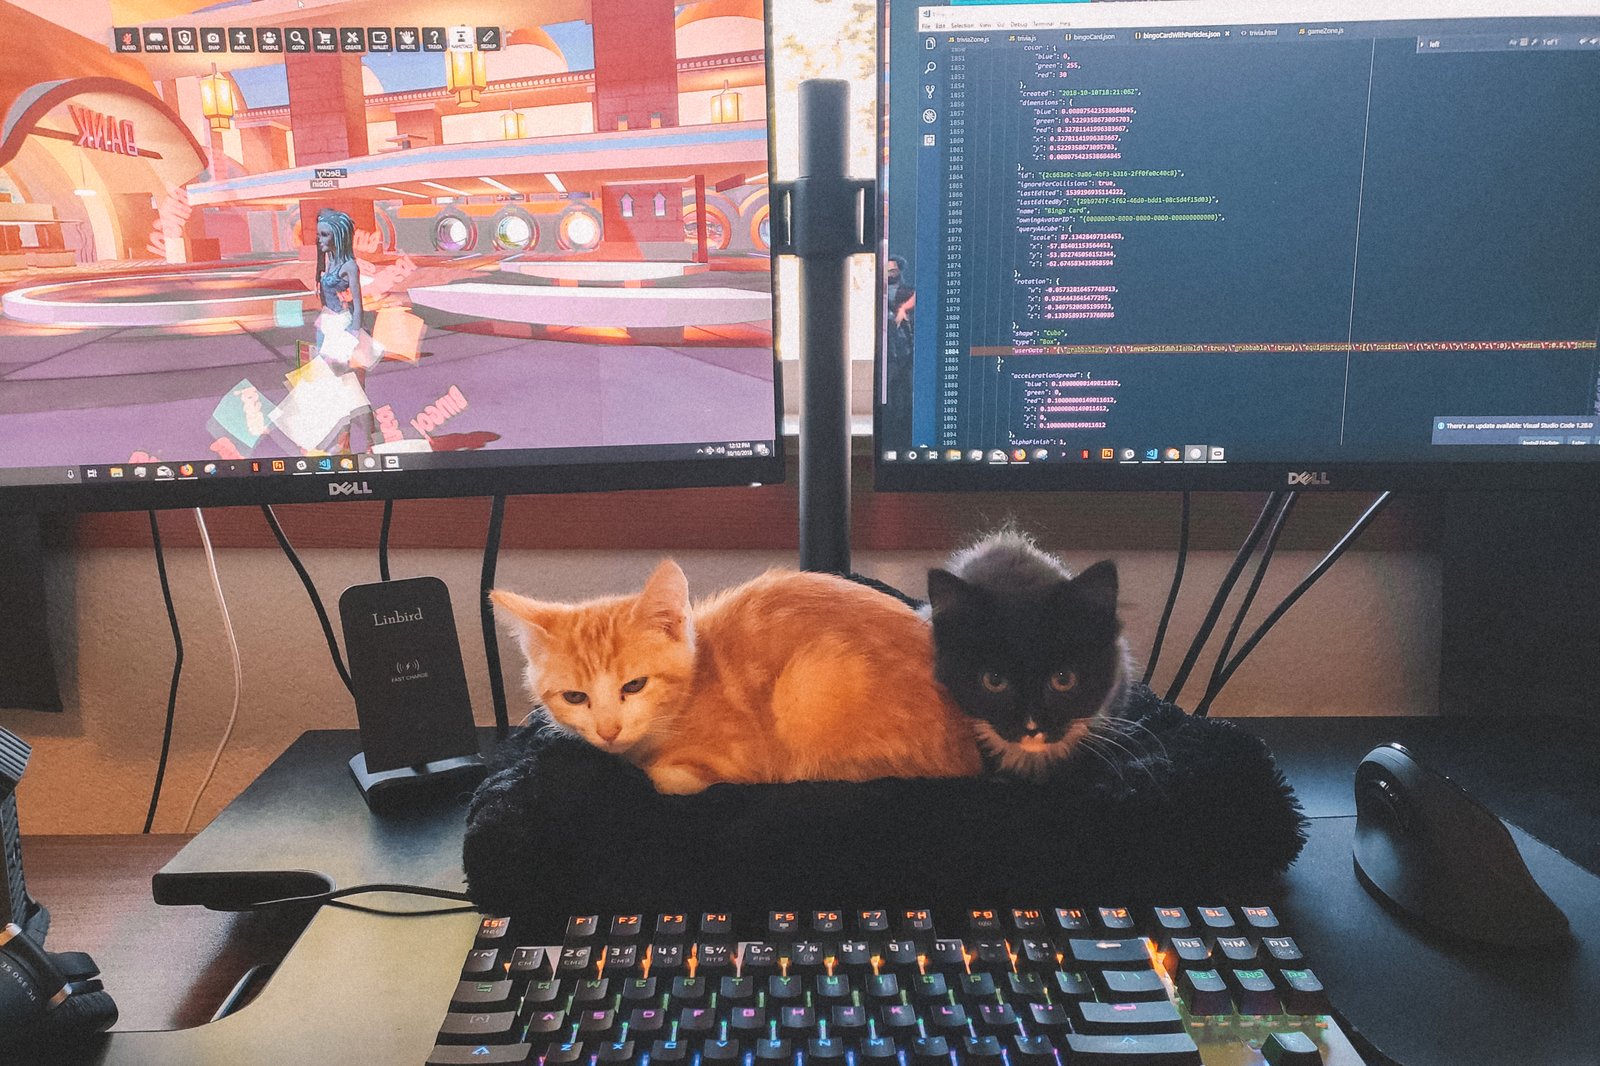 Two monitors that show a High Fidelity employee coding remotely at her home, getting to spend time with her two kittens, sitting just in front of the keyboard.